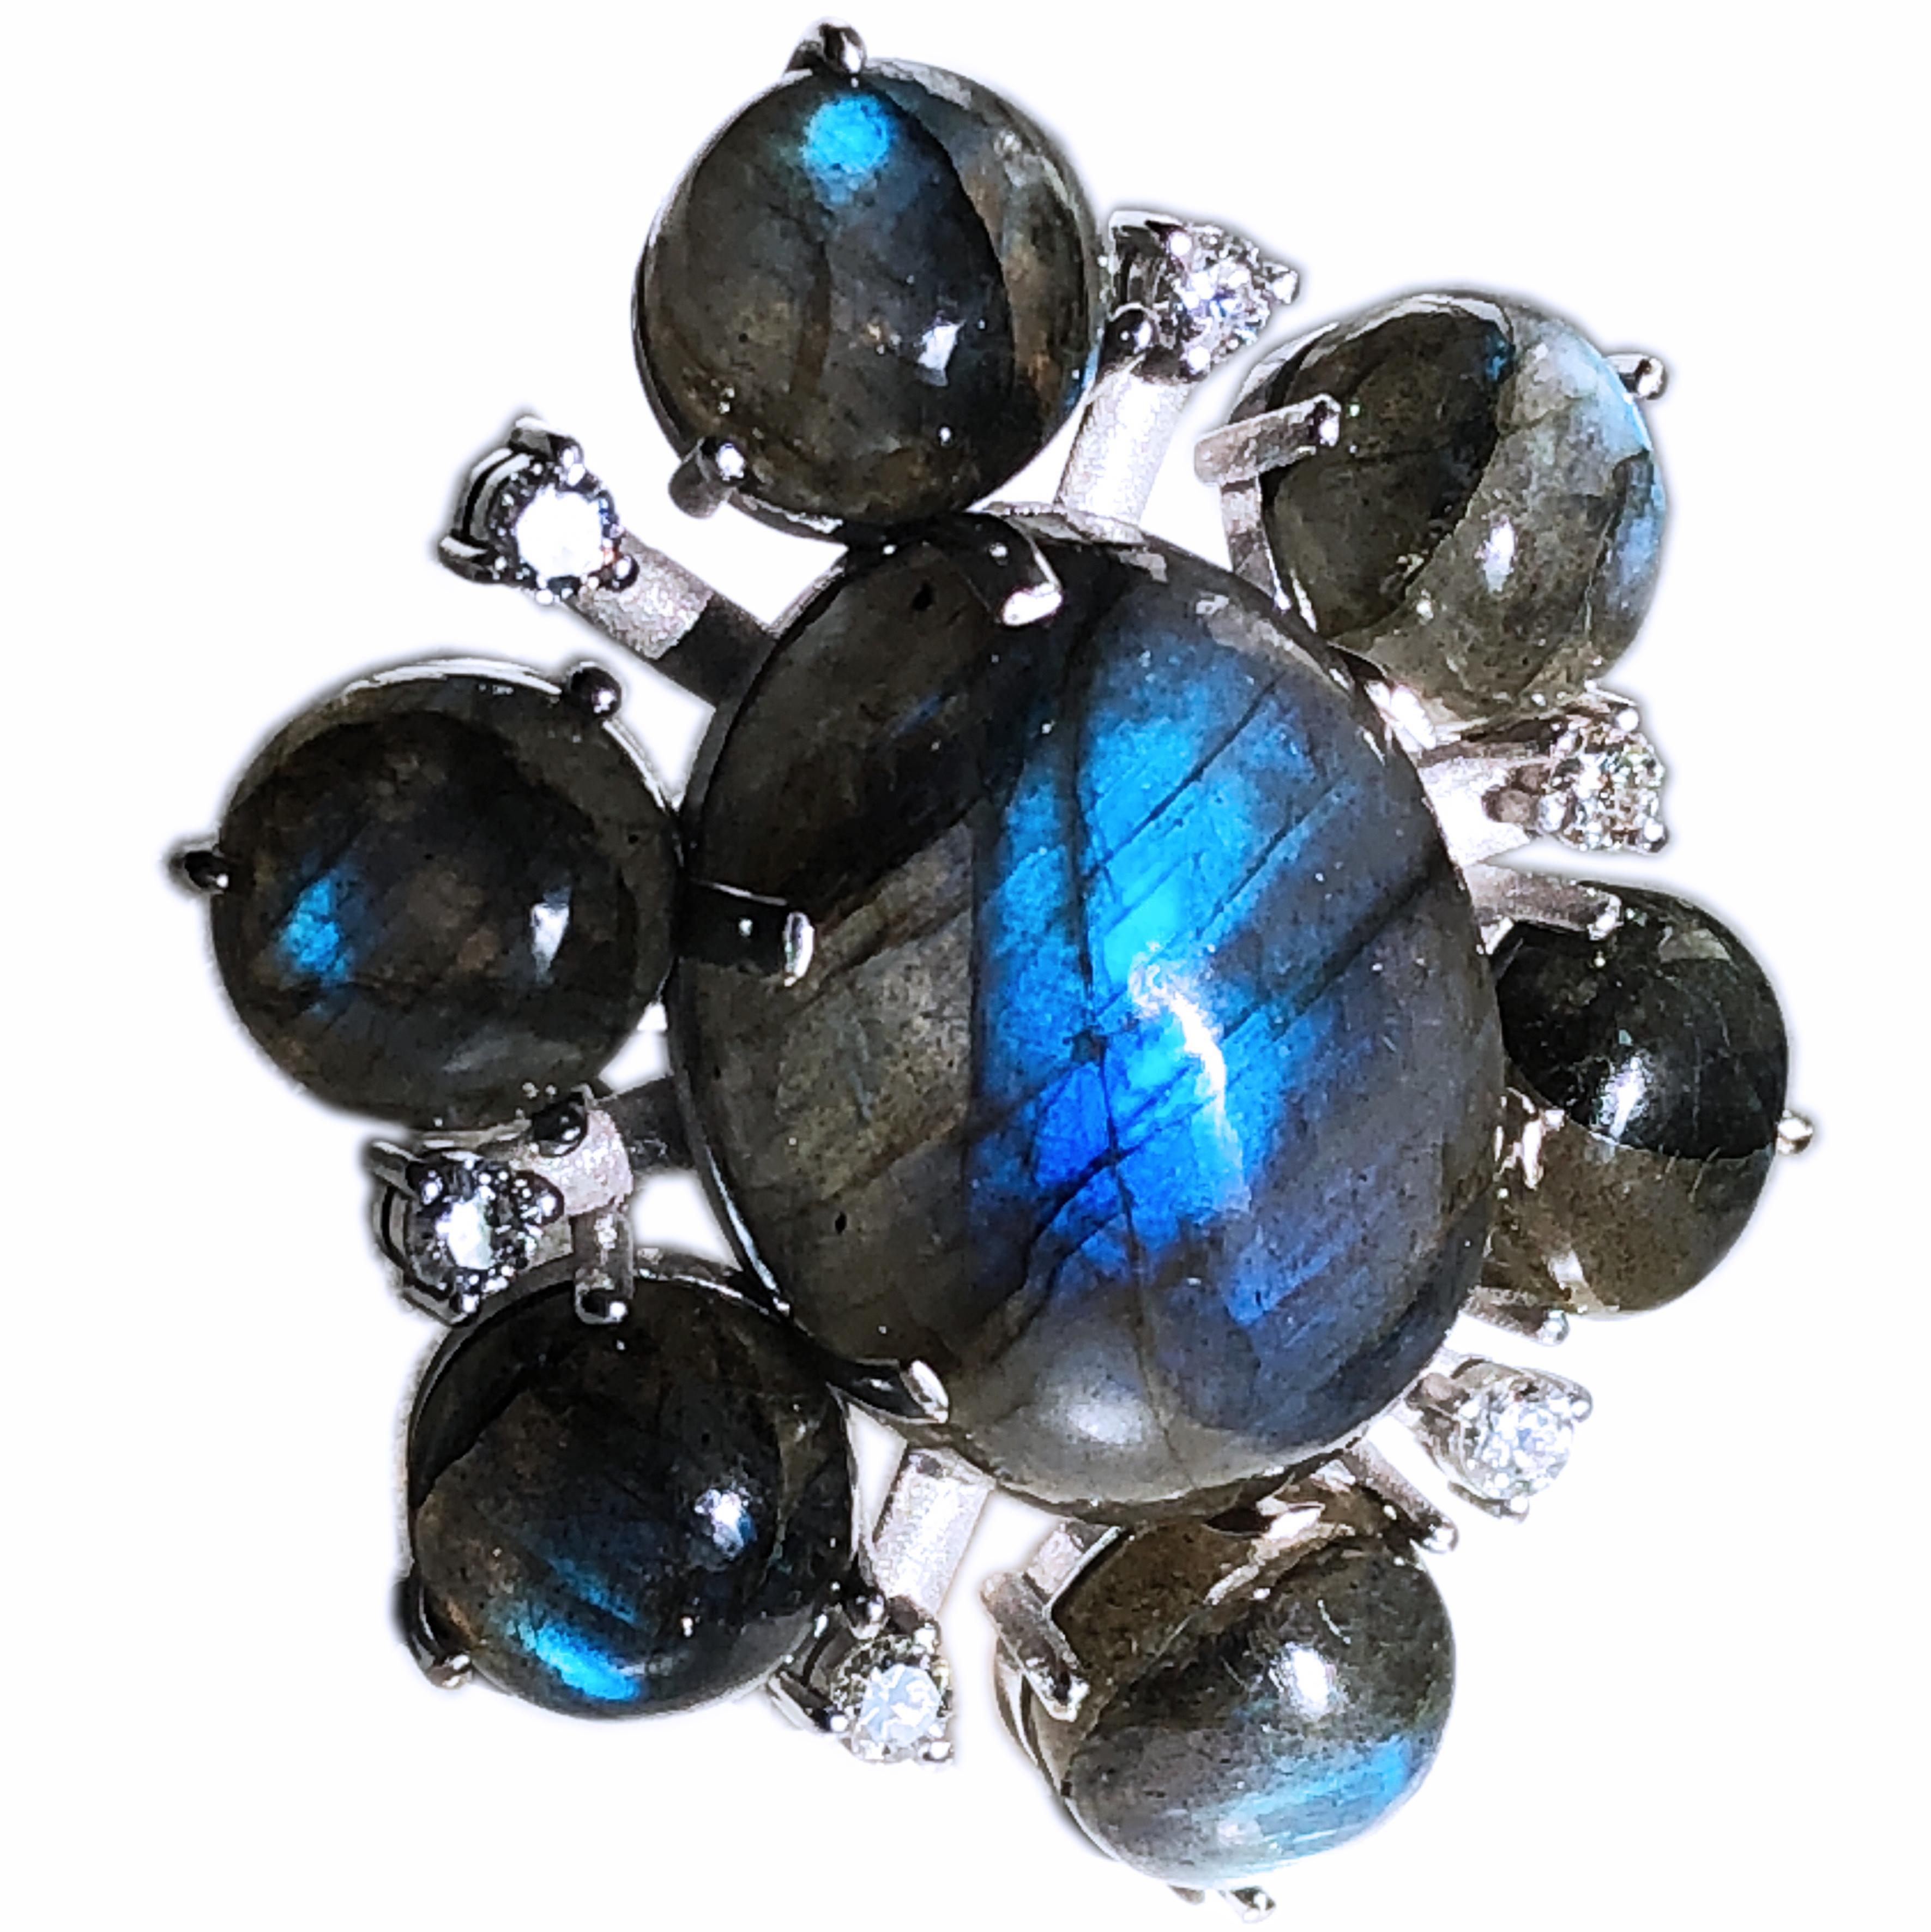 One-of-a-kind Contemporary Cocktail Ring Featuring a 22.50 Carat Natural Oval Labradorite Cabochon (0.911x0.666in) surrounded by six White Diamond(0.61Kt) and six round small Labradorite Cabochon in a 15.80g 18K White Gold Setting.
The incredible